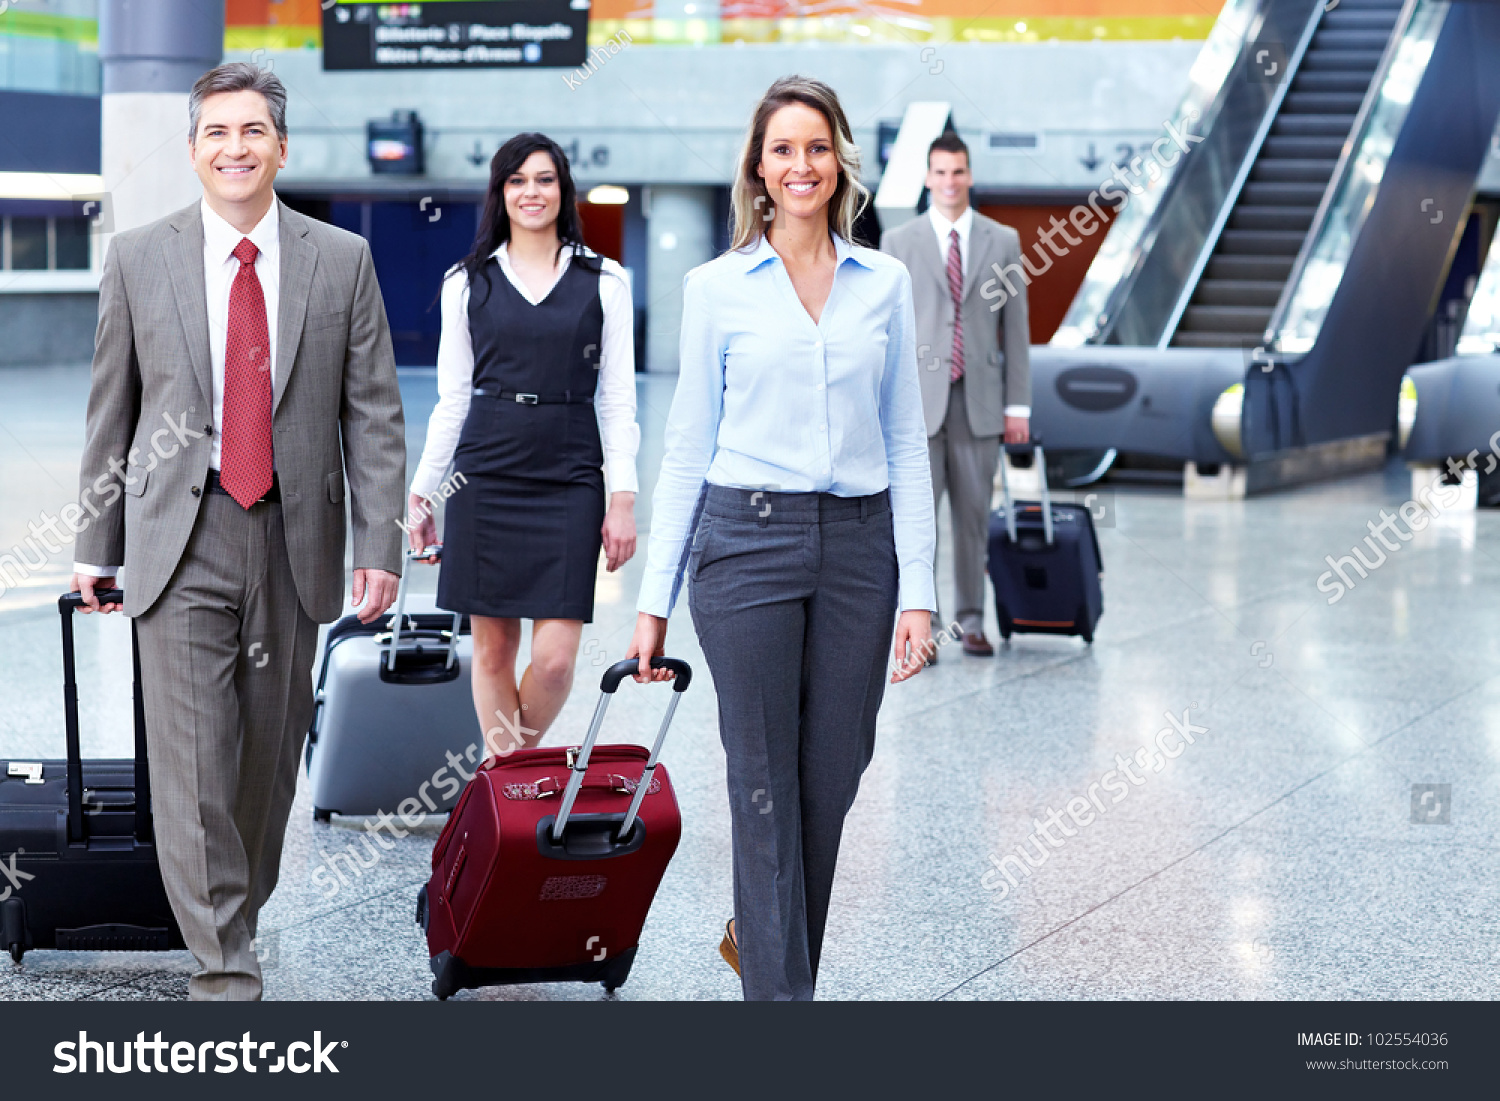 Group Of Business Person At The International Airport. Stock Photo ...